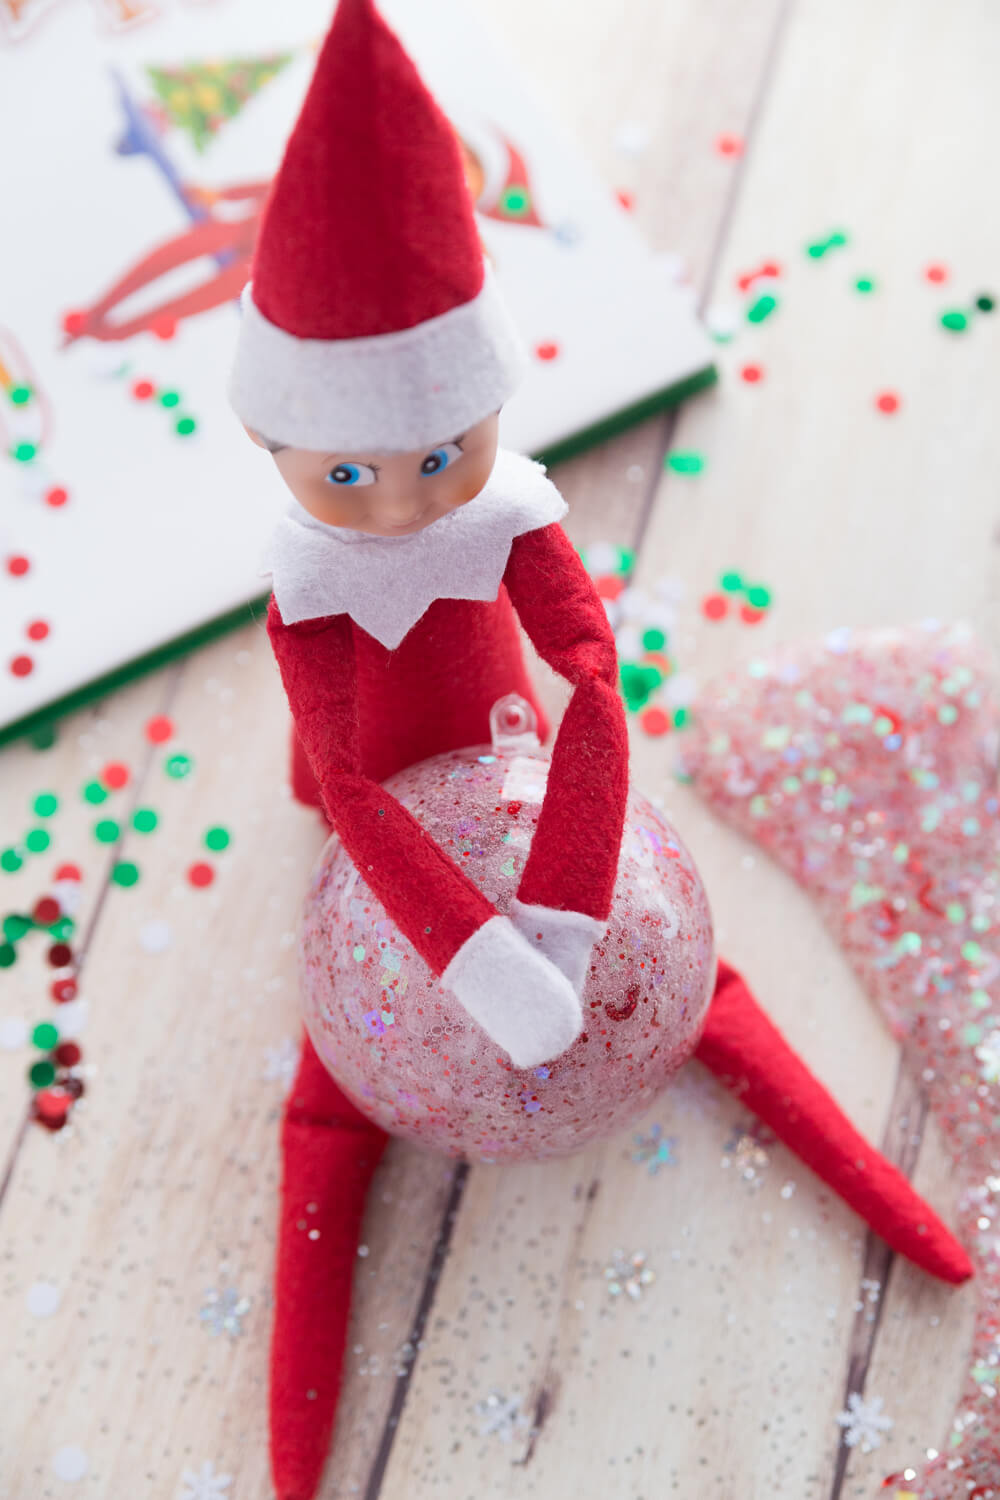 Elf on the Shelf holding slime ornament filled with homemade slime